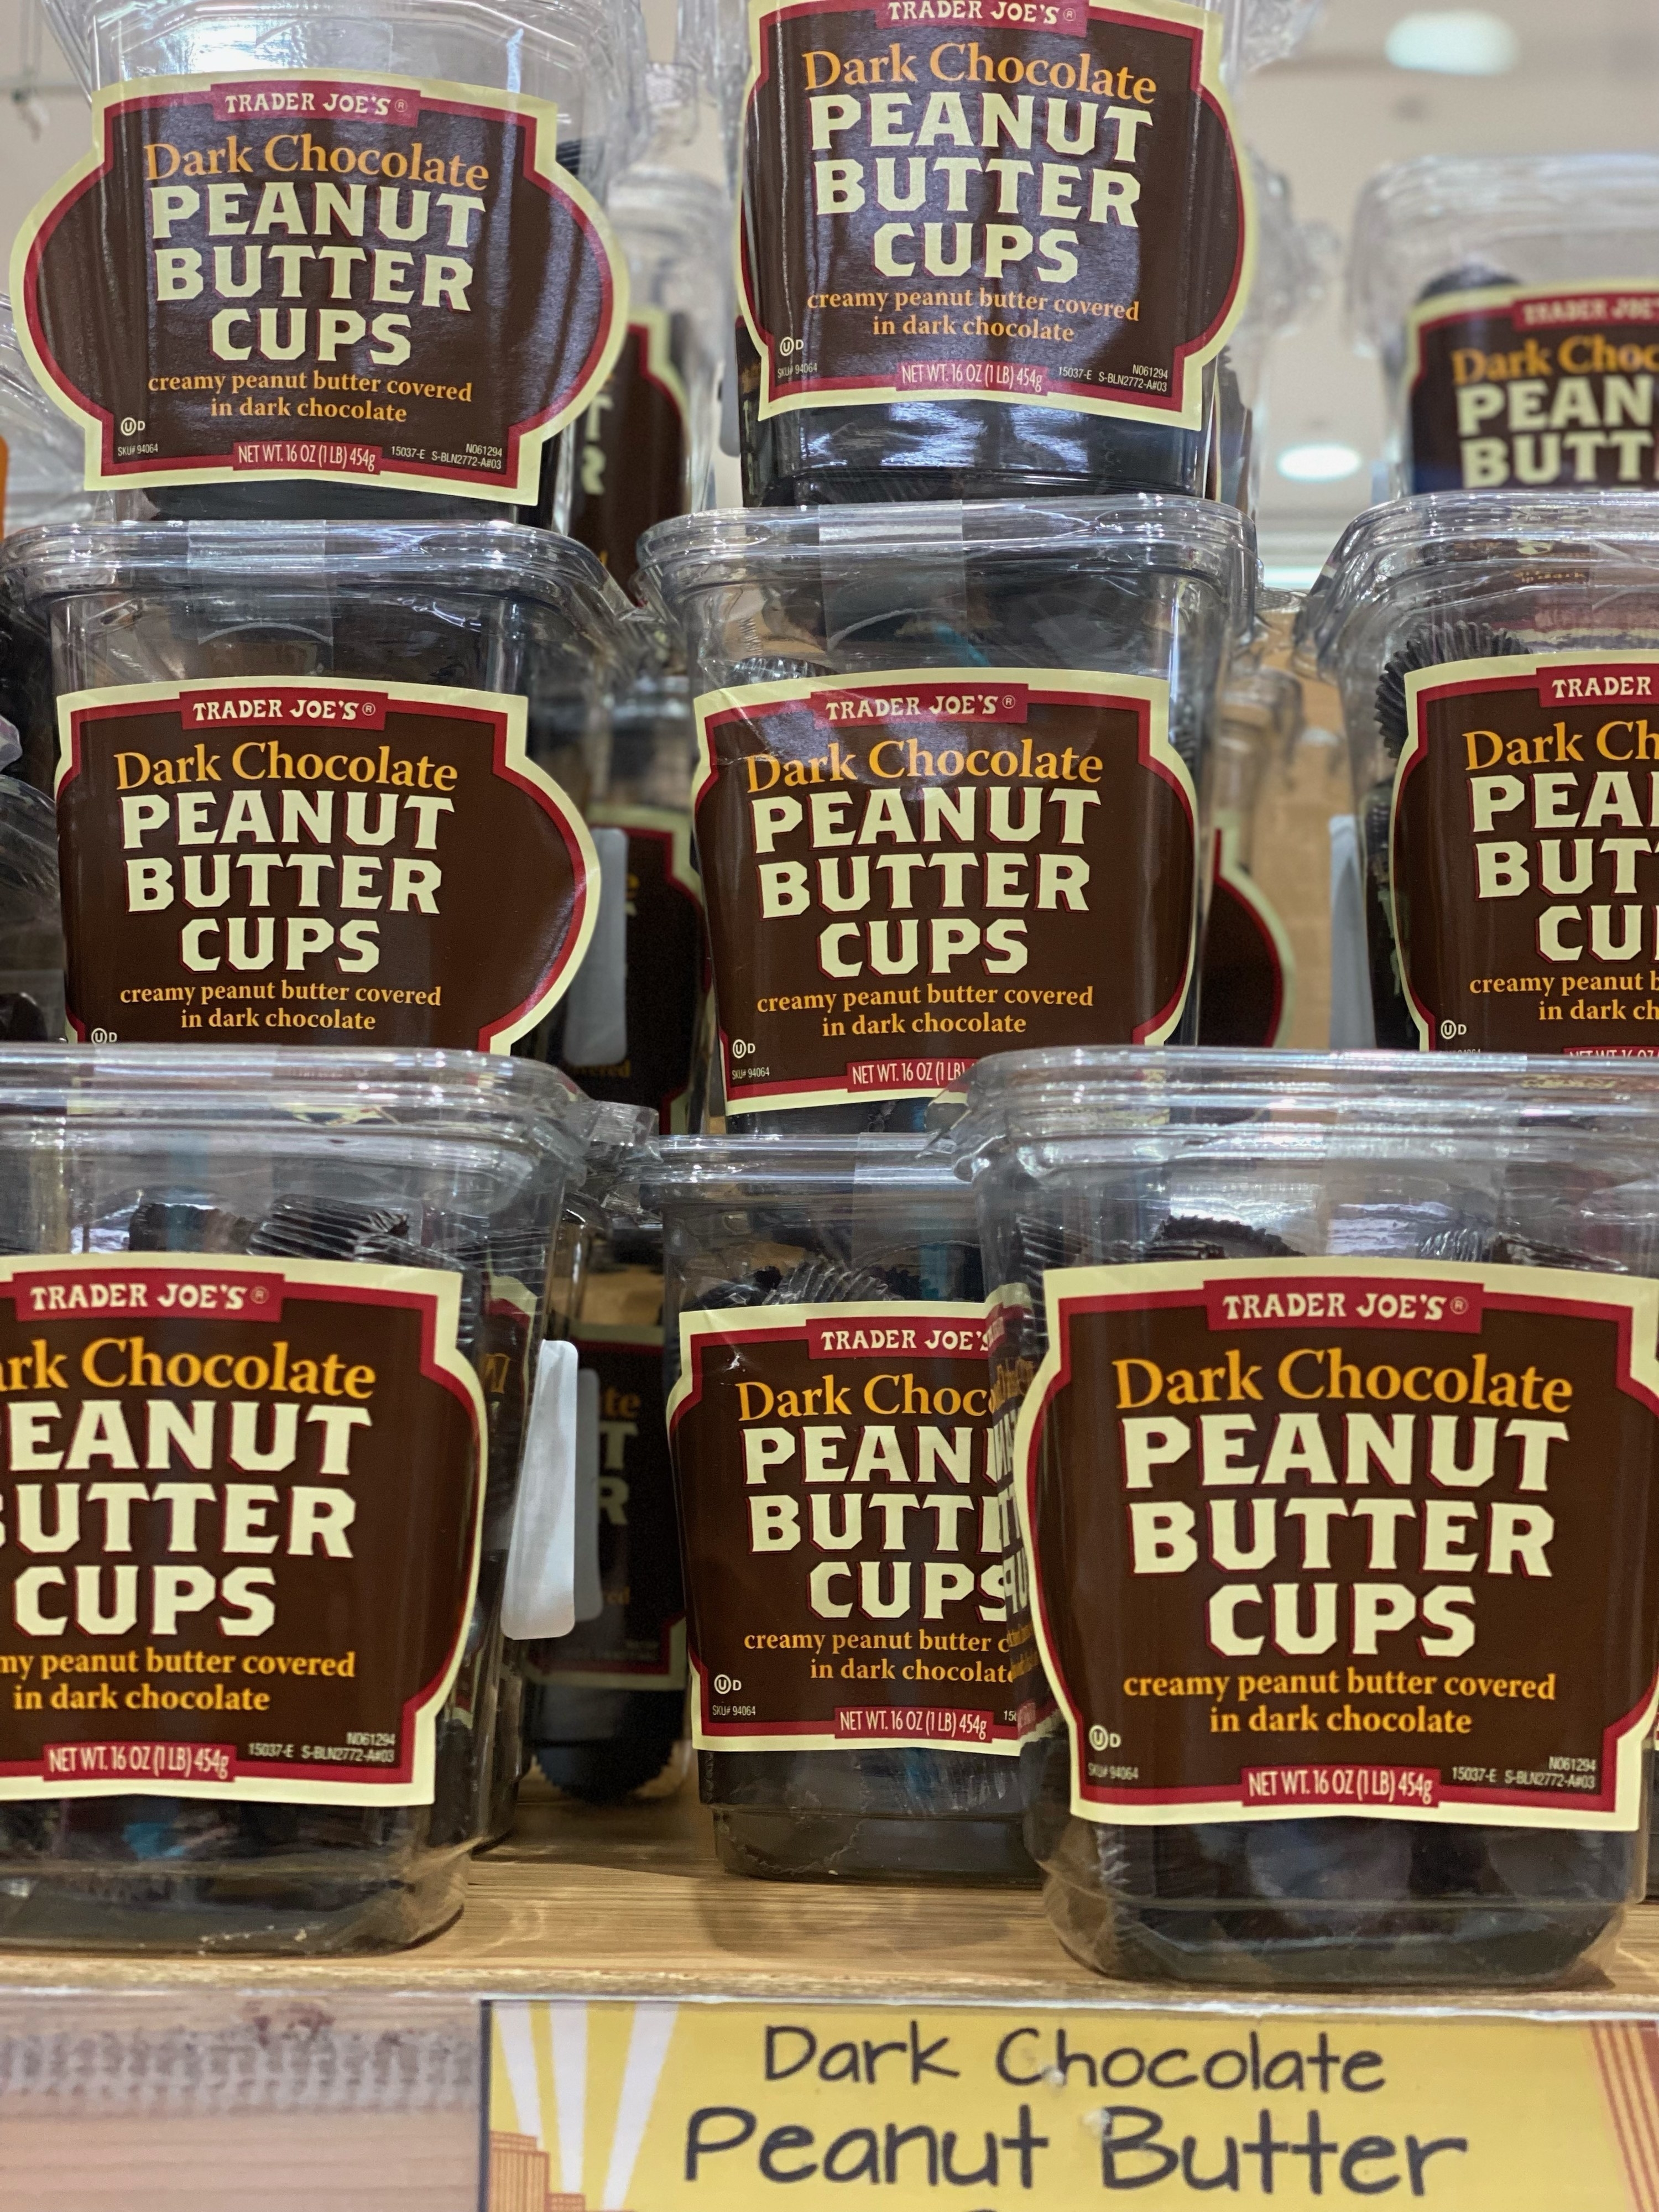 Containers of Dark Chocolate Peanut Butter Cups.